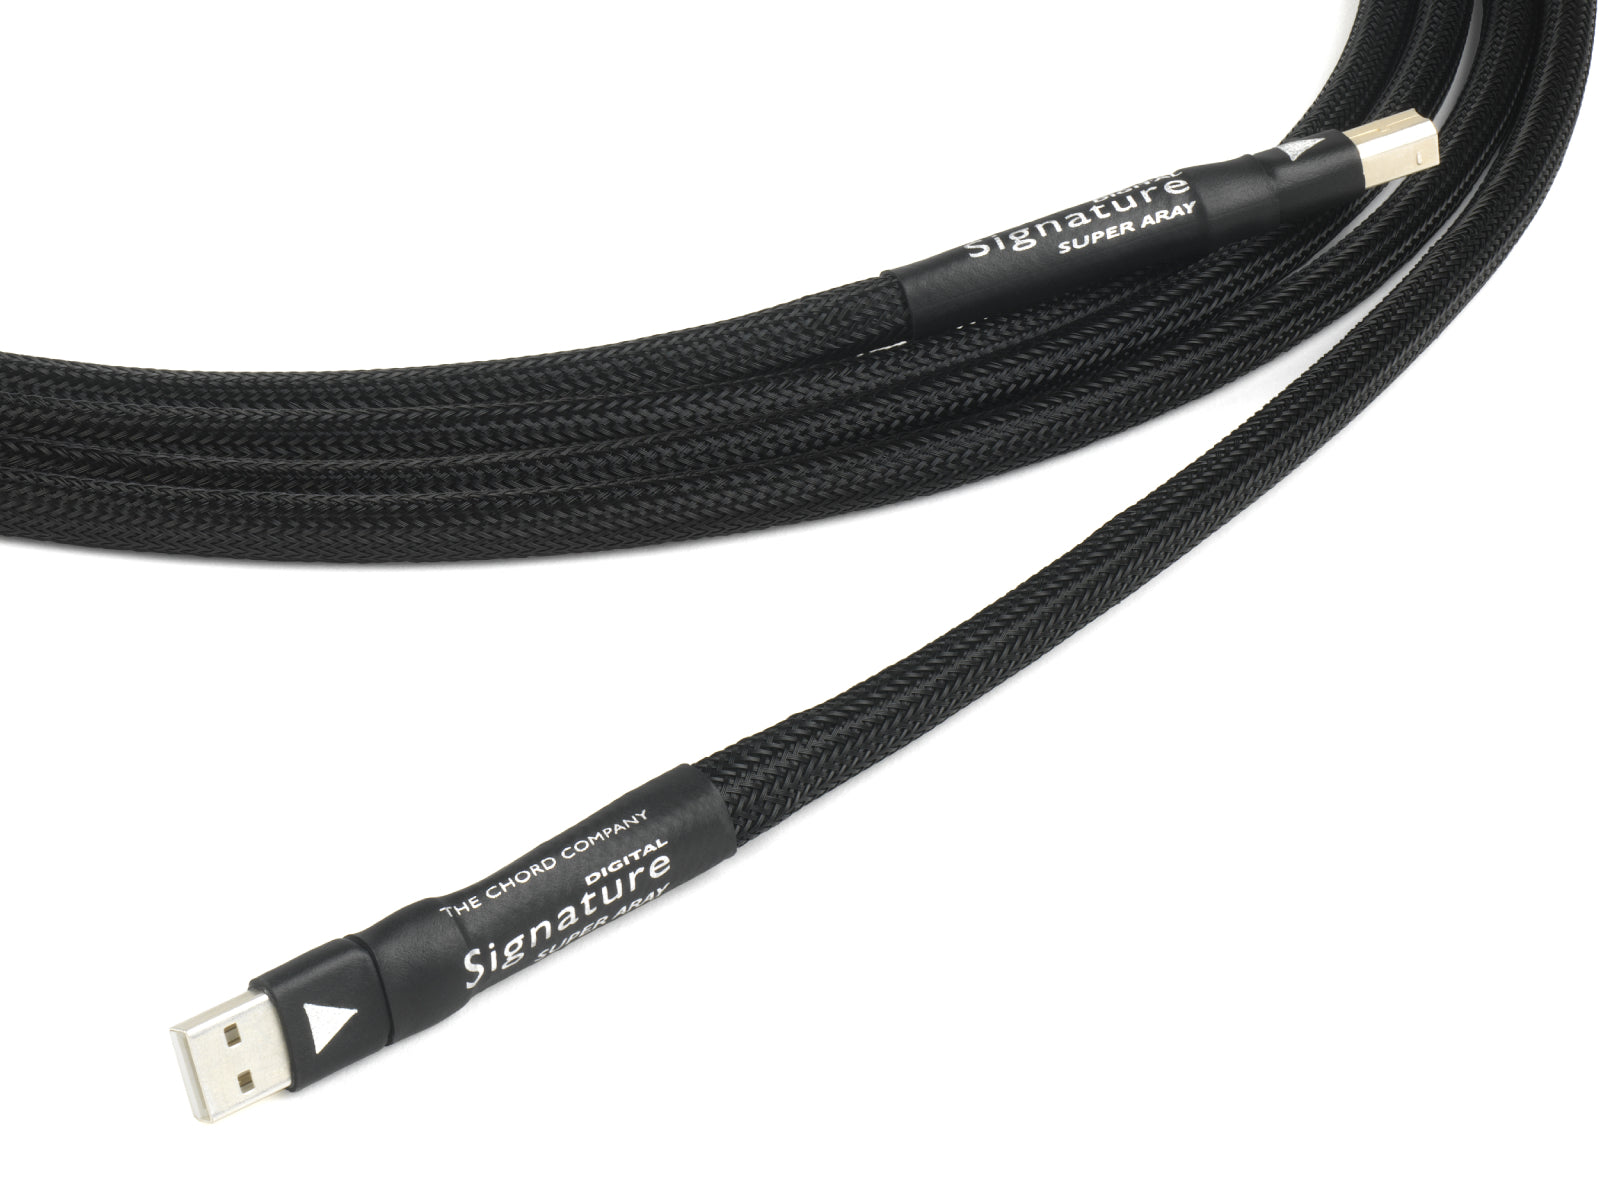 Chord Signature Super ARAY USB (ChorAlloy plated)